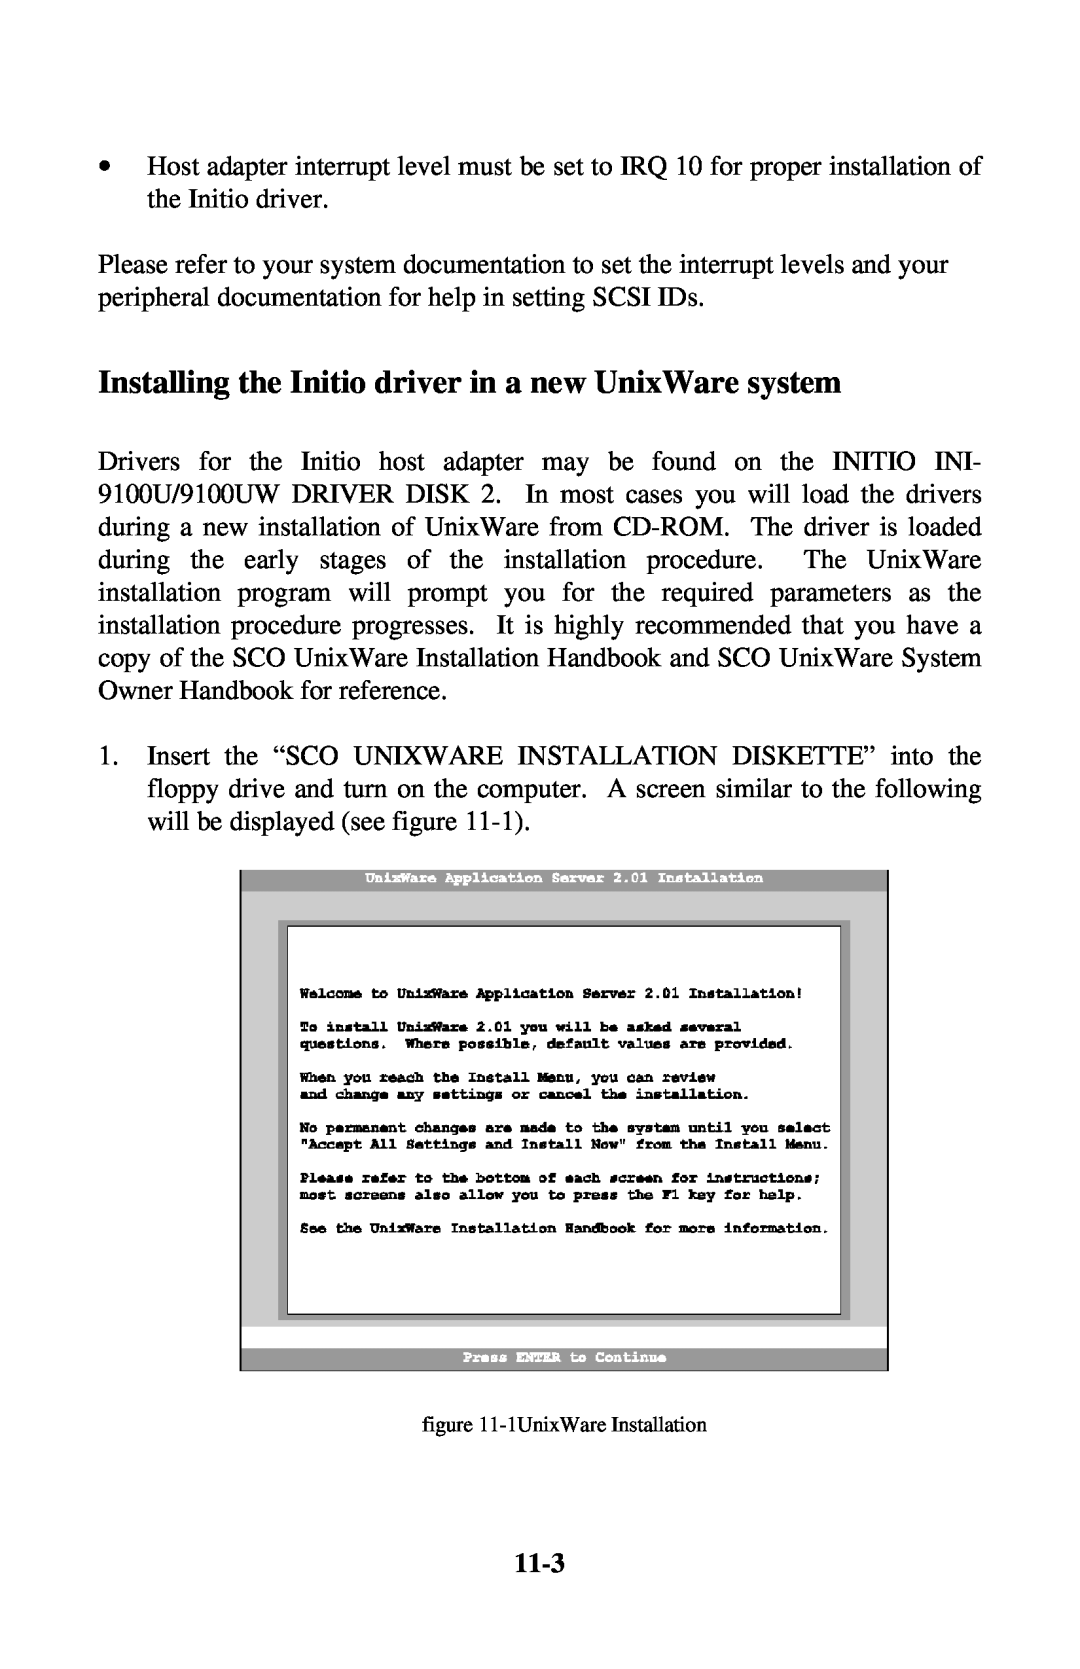 Initio INI-9100UW user manual Installing the Initio driver in a new UnixWare system, 11-3, 1UnixWare Installation 